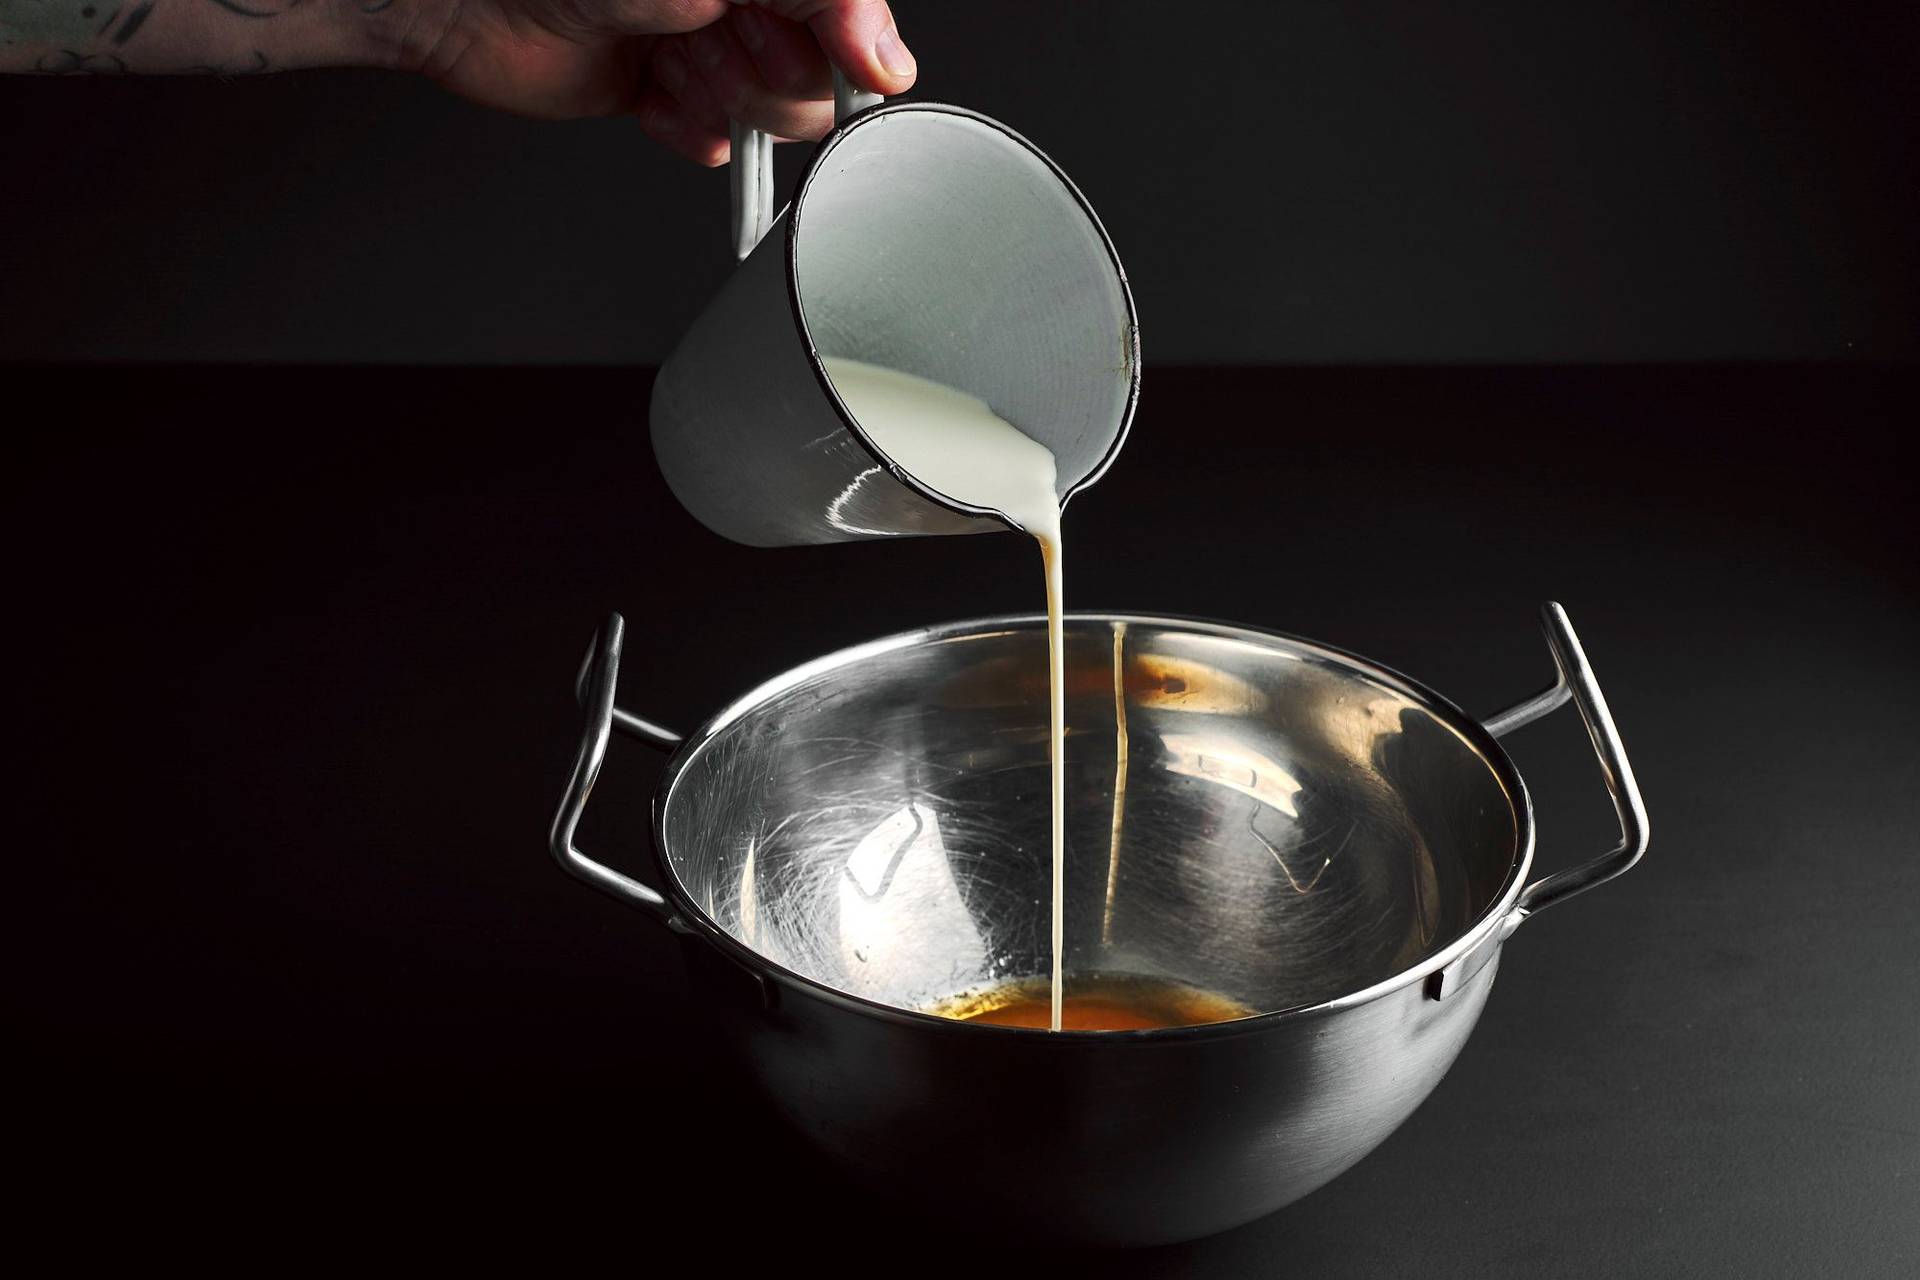 pouring condensed milk into a bowl with egg yolks with black background